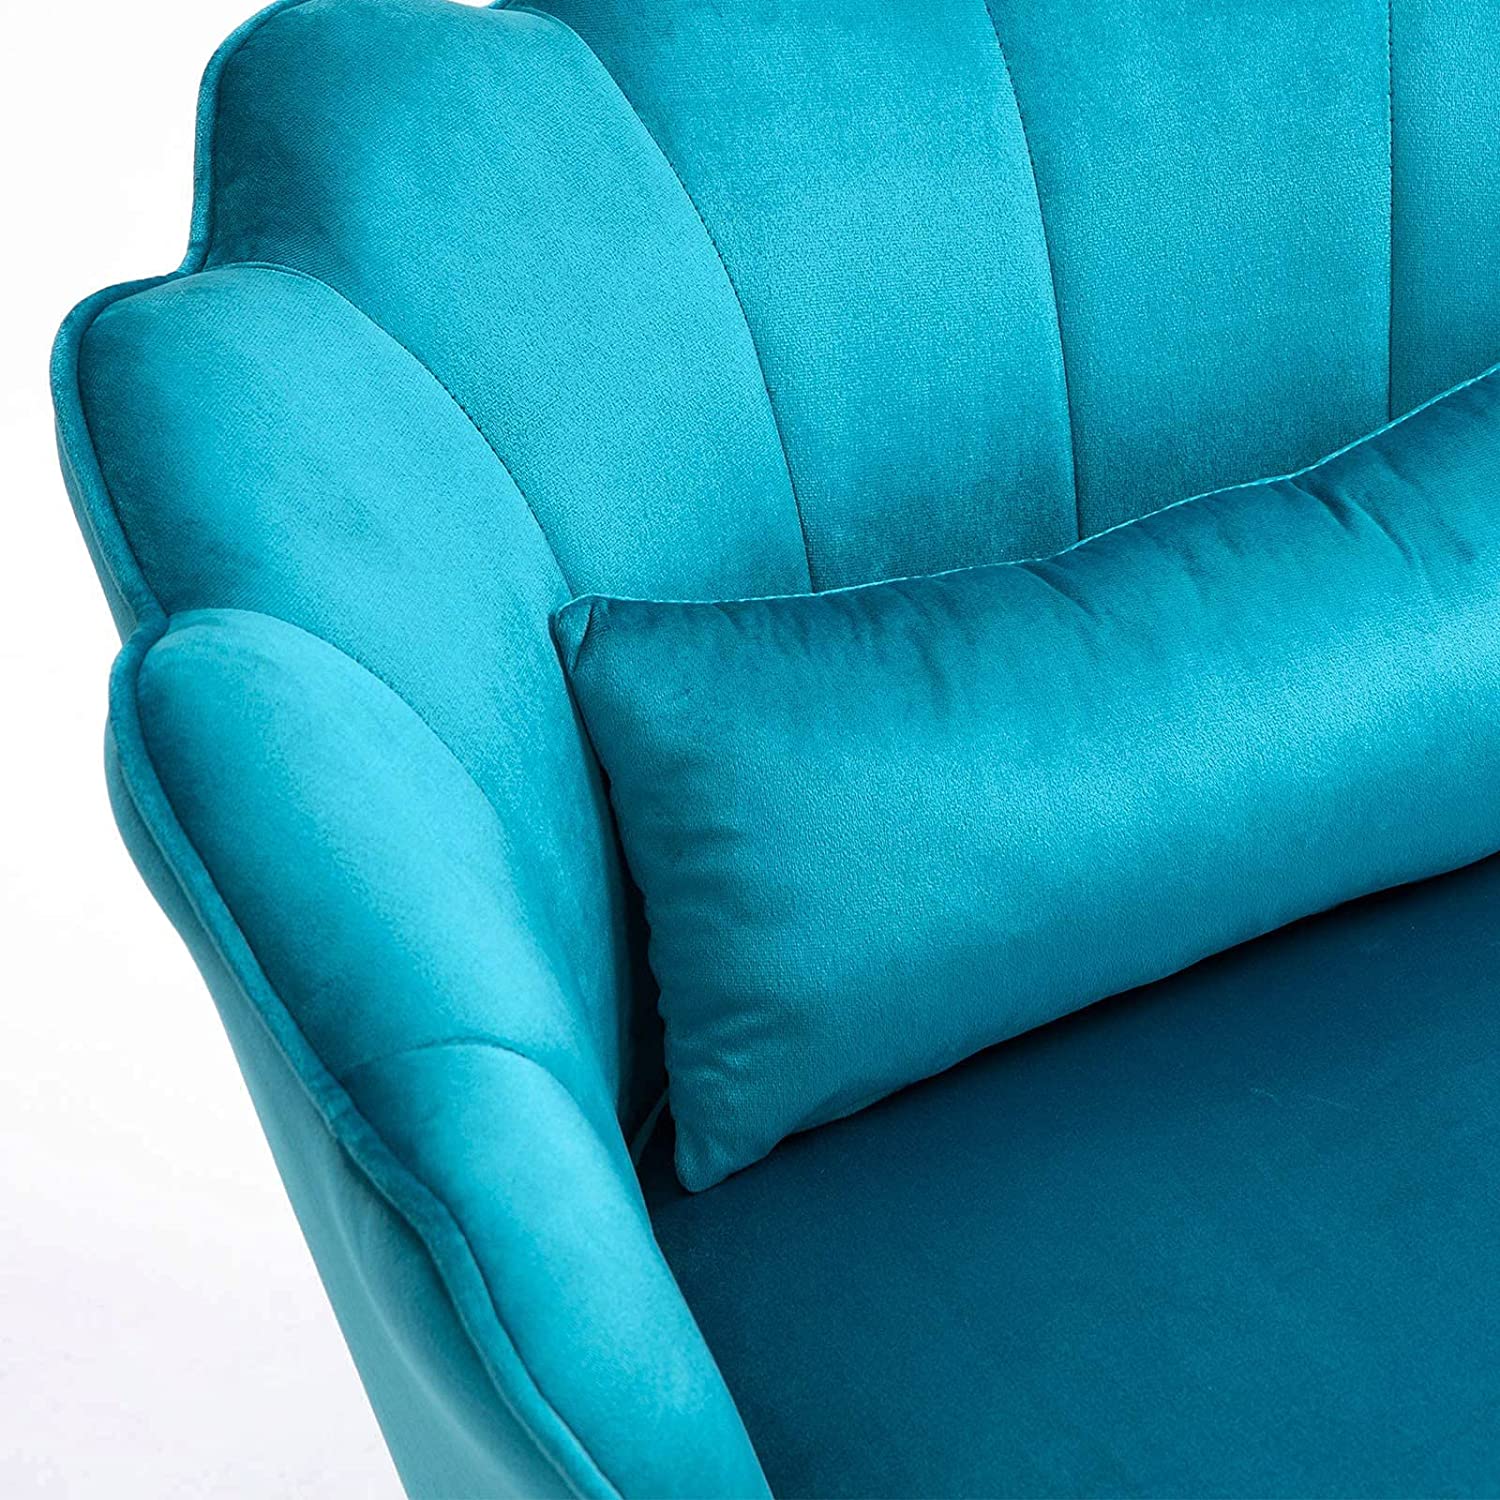 Azure Blue Velvet Chair with Lumbar Pillow for Bedroom, Accent Chair Mid Century Modern Vanity Chair for Living Room, Fabric Upholstered Arm Chair Guest Chair with Golden Metal Legs